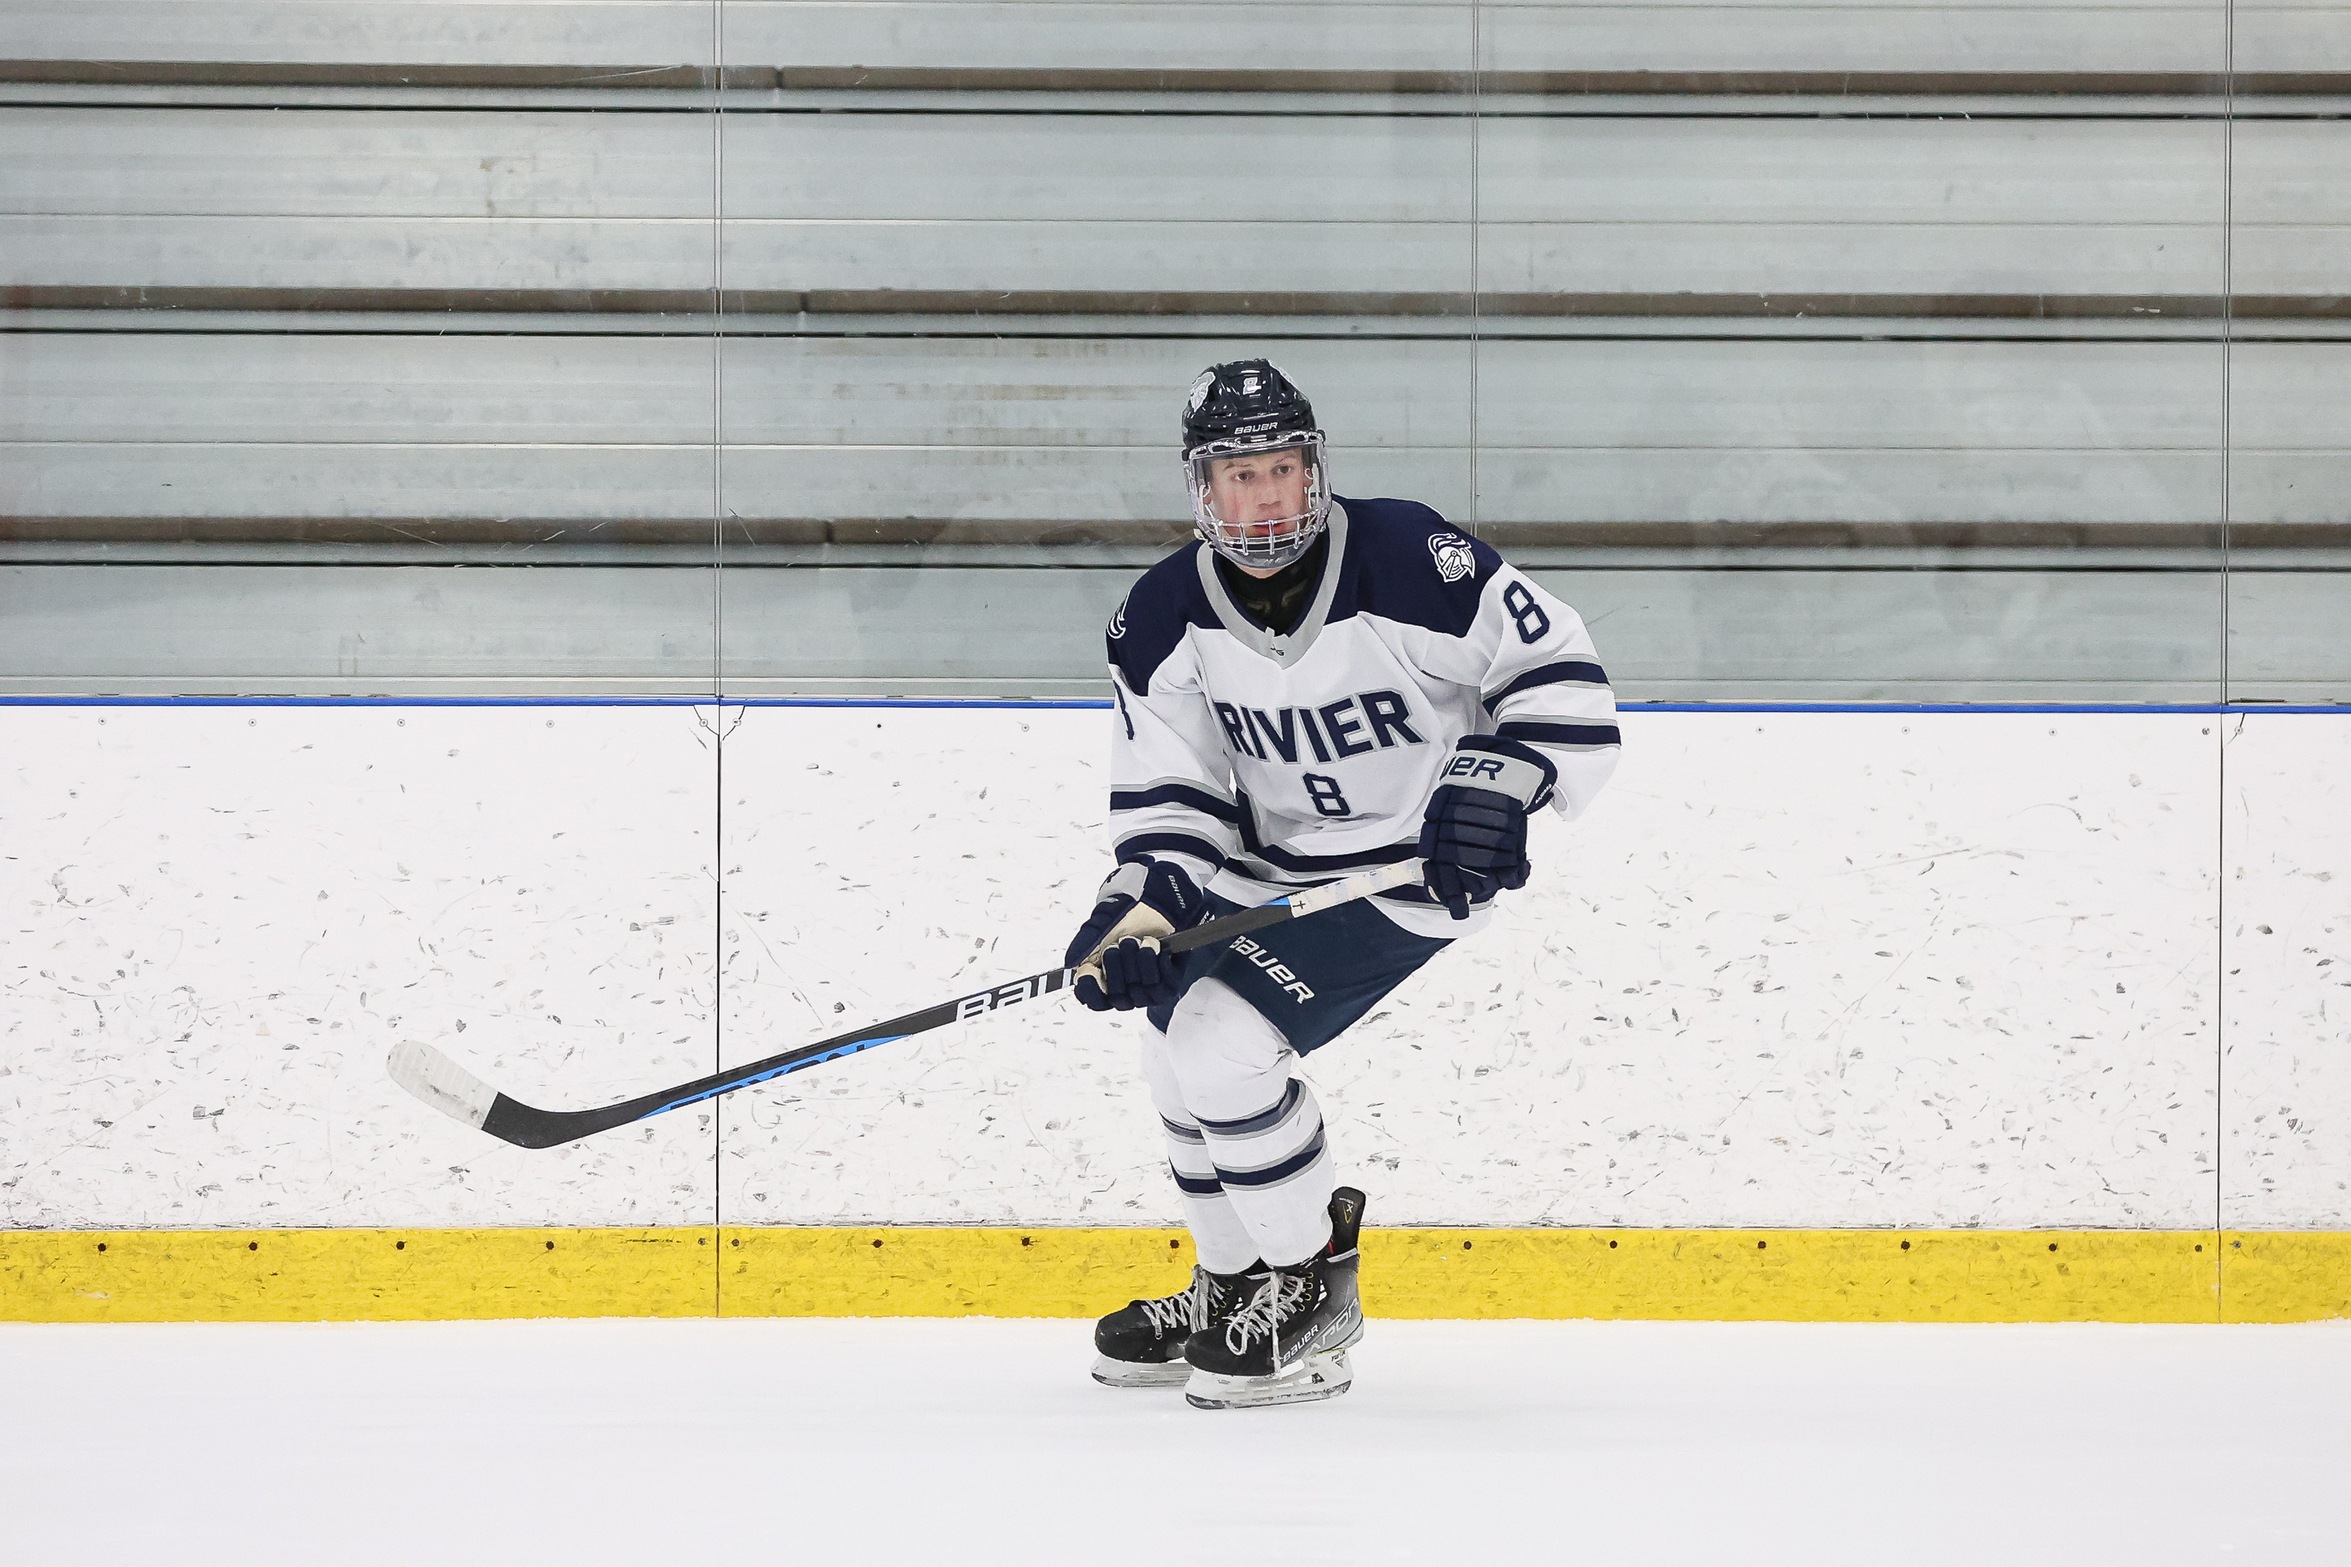 Men’s Hockey Ends Season with Win Over Post